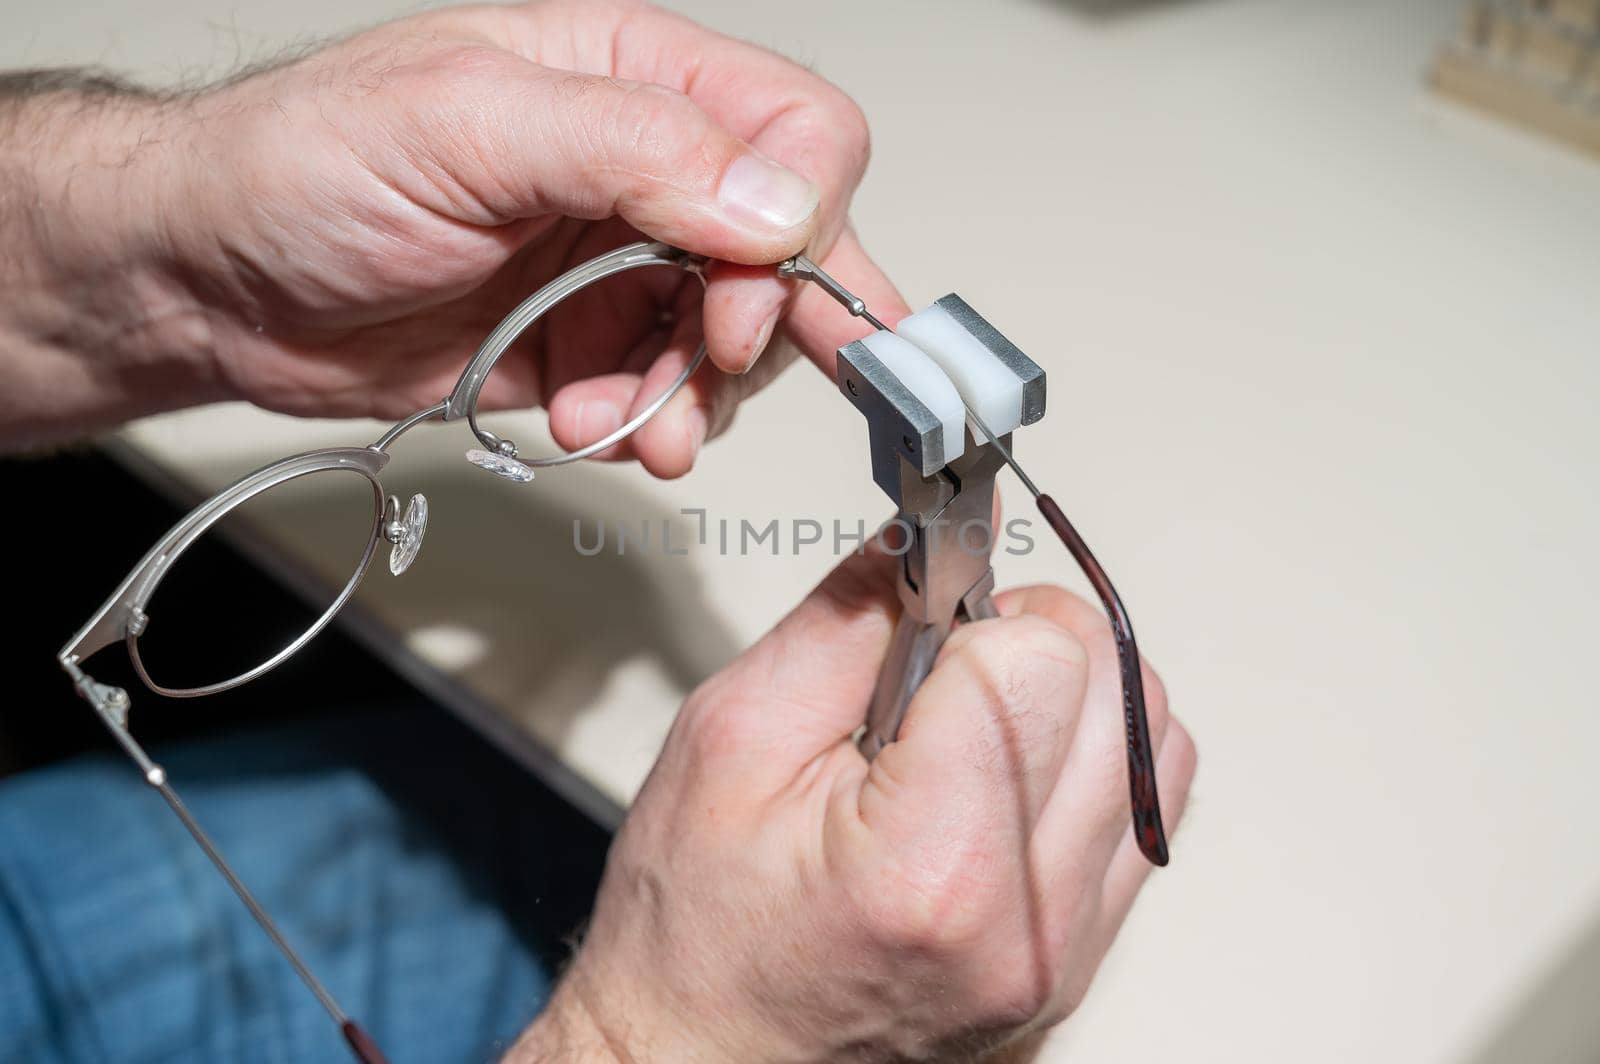 The man bends the temples of his glasses. The master repairs the frame with tongs